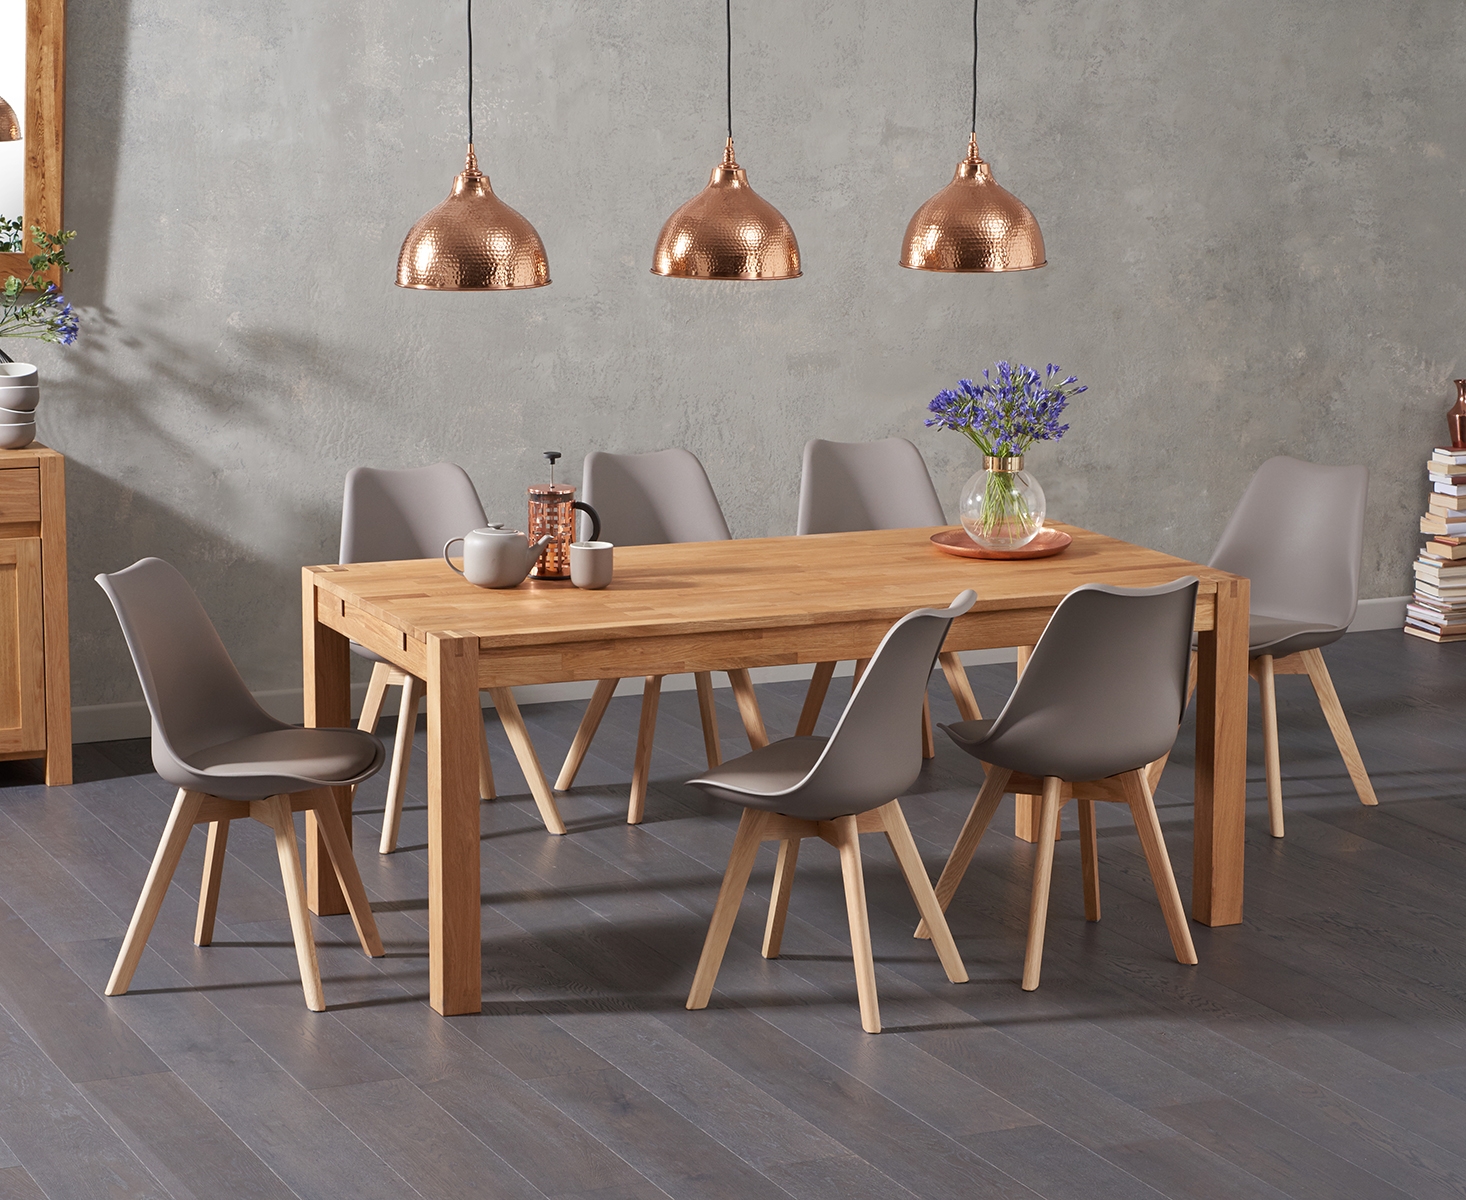 Verona 180cm Solid Oak Dining Table With 6 Light Grey Orson Faux Leather Chairs